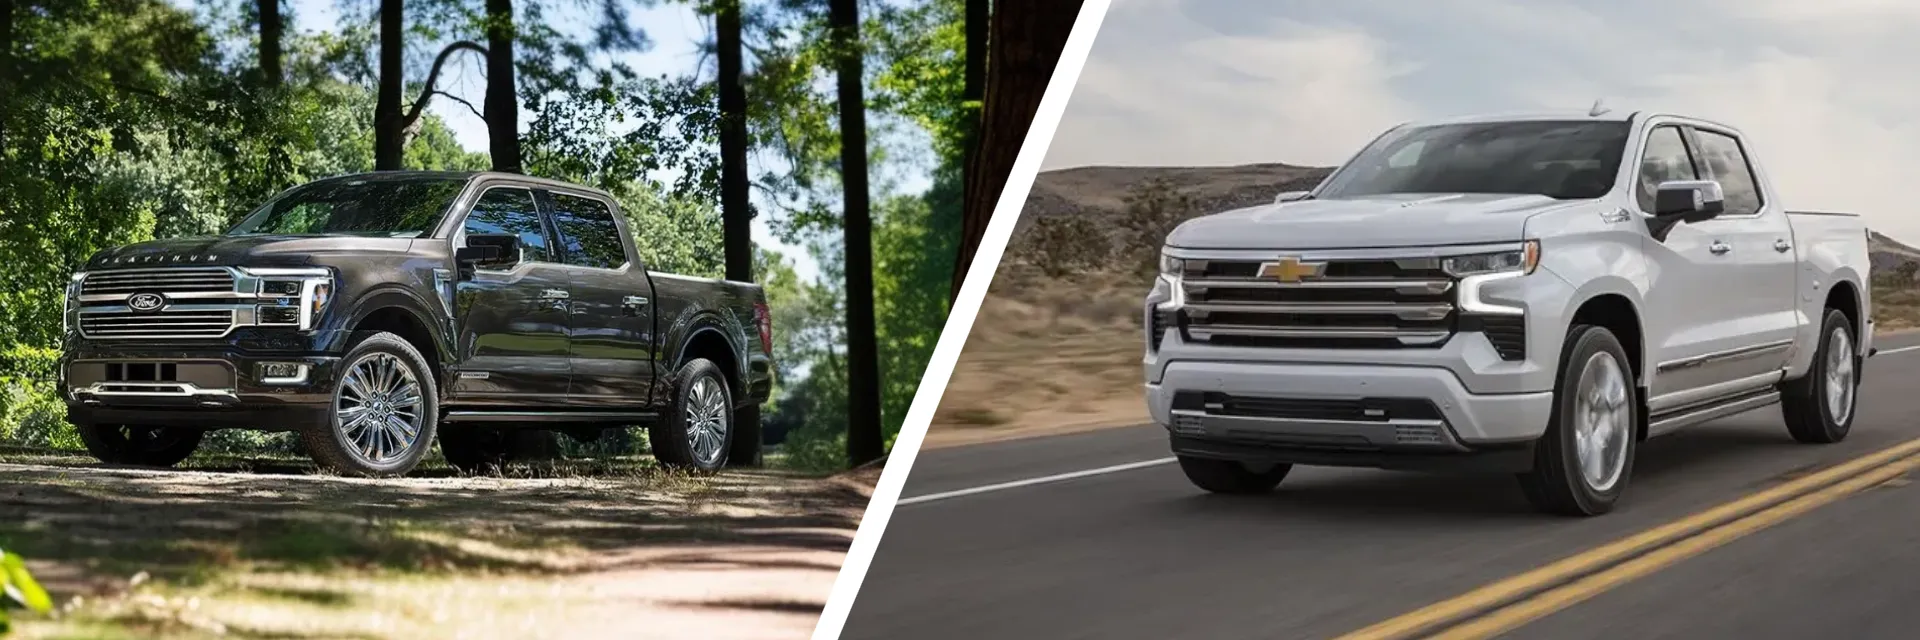 2024 Ford F-150 vs 2024 Chevy Silverado 1500: Comparing two powerful trucks. Discover the perfect full-size truck for you at Cloninger Ford of Hickory. Compare performance, interior, safety, and technology features to find your ultimate truck.